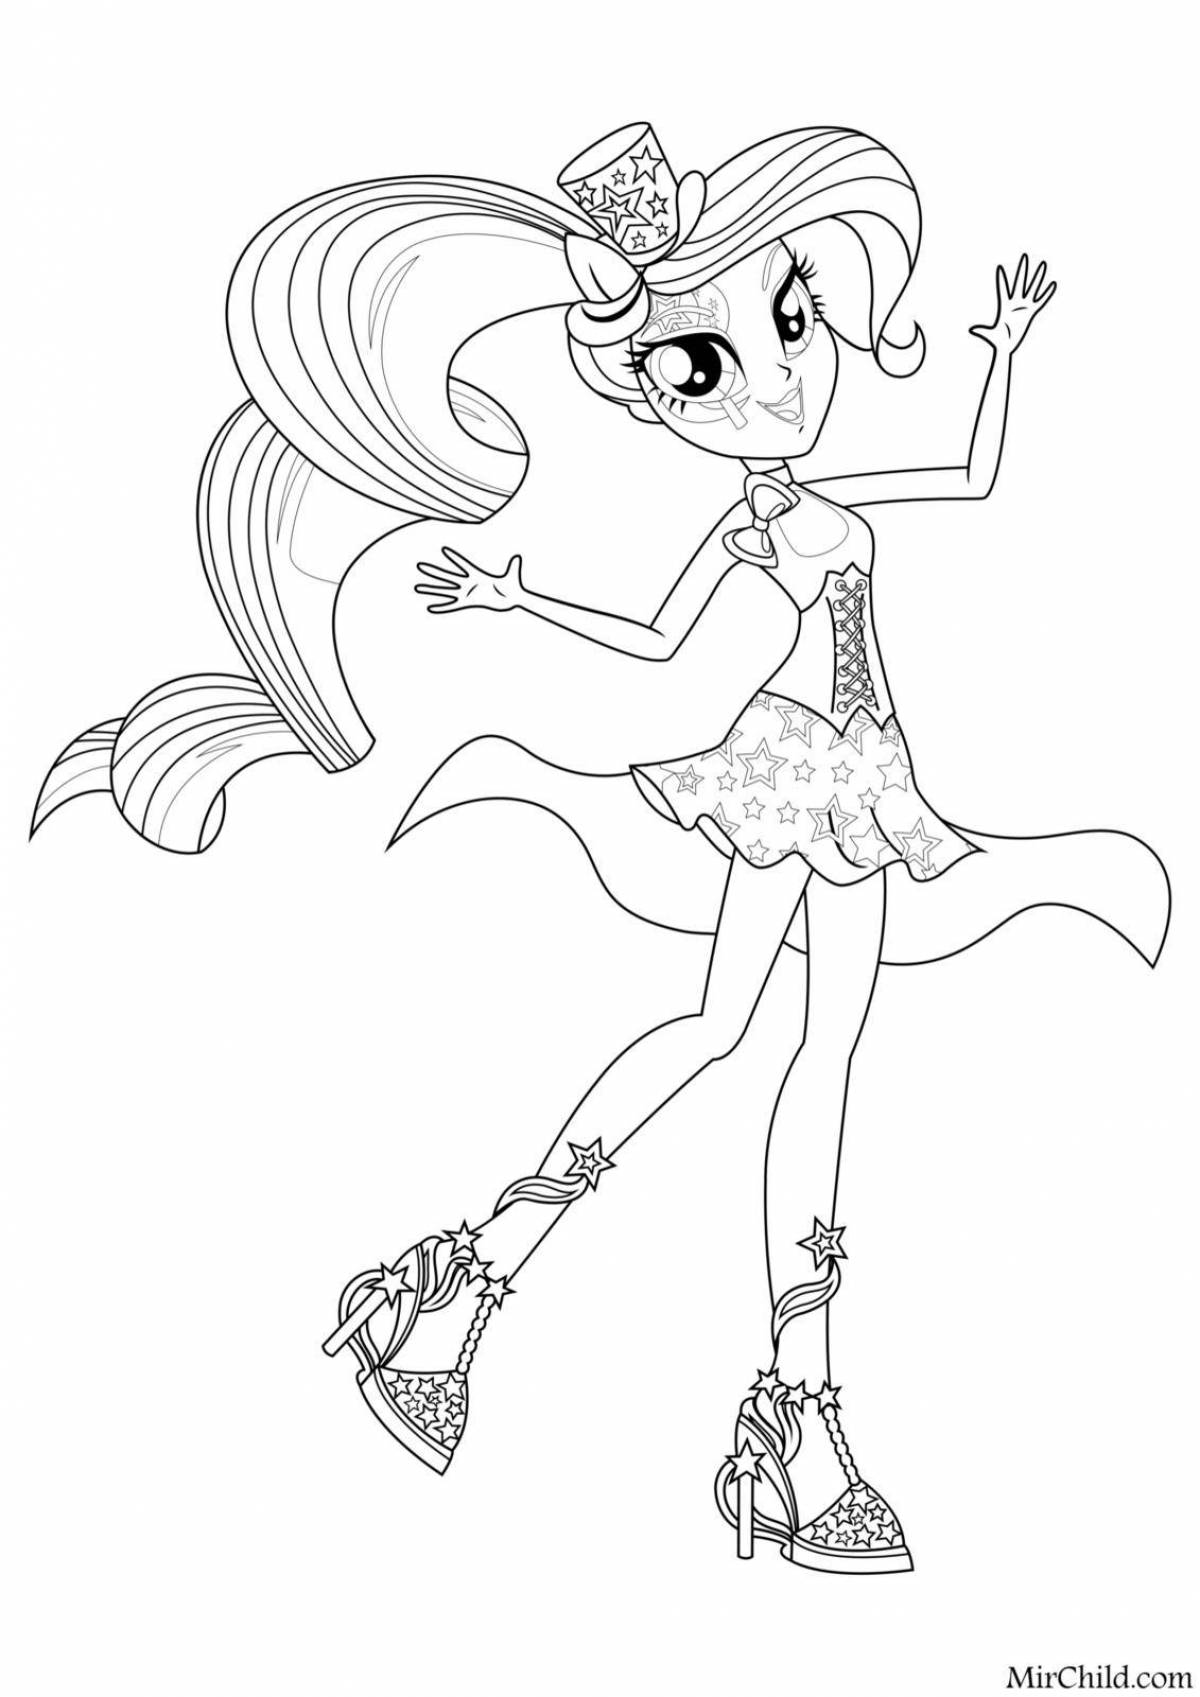 Coloring page glamorous little pony girls